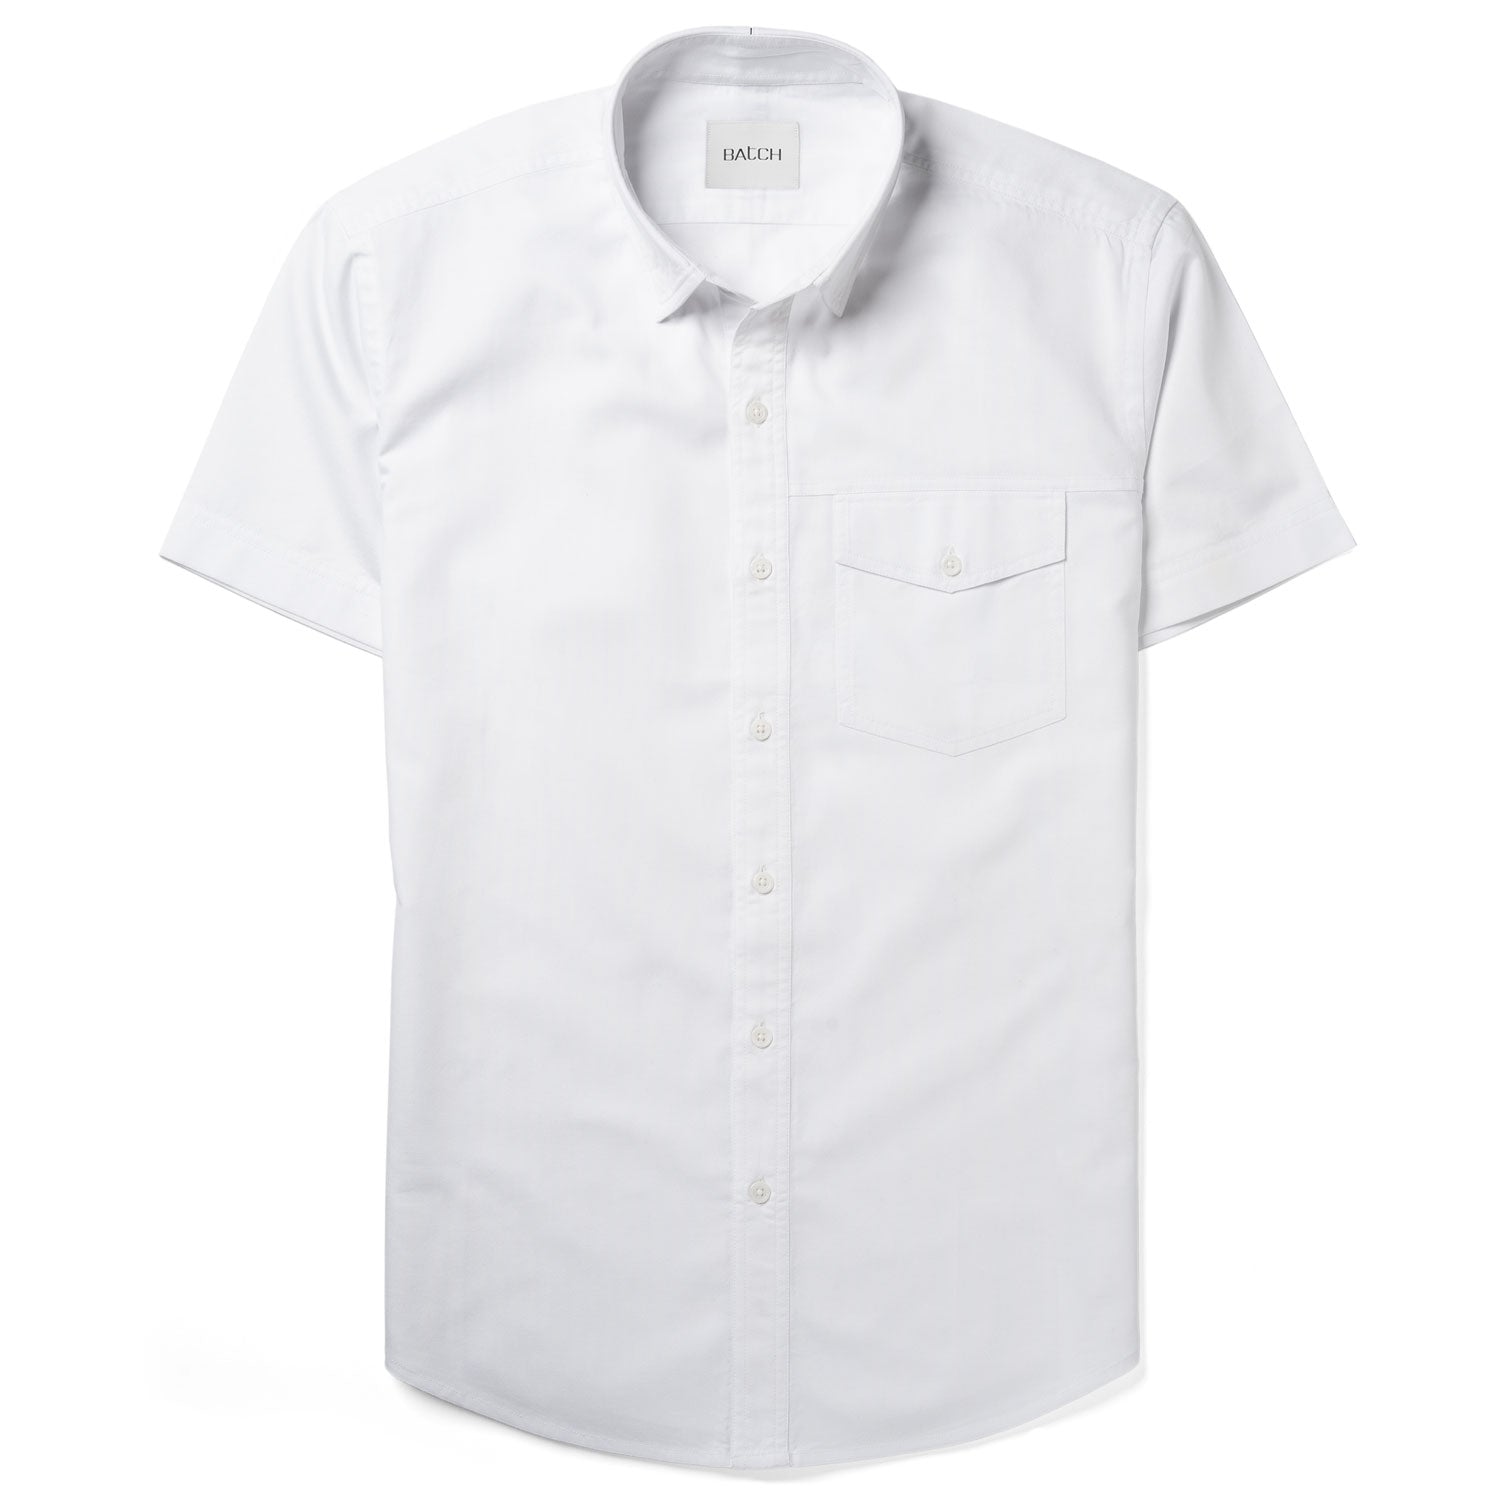 Author Short Sleeve Casual Shirt – Pure White Cotton Oxford